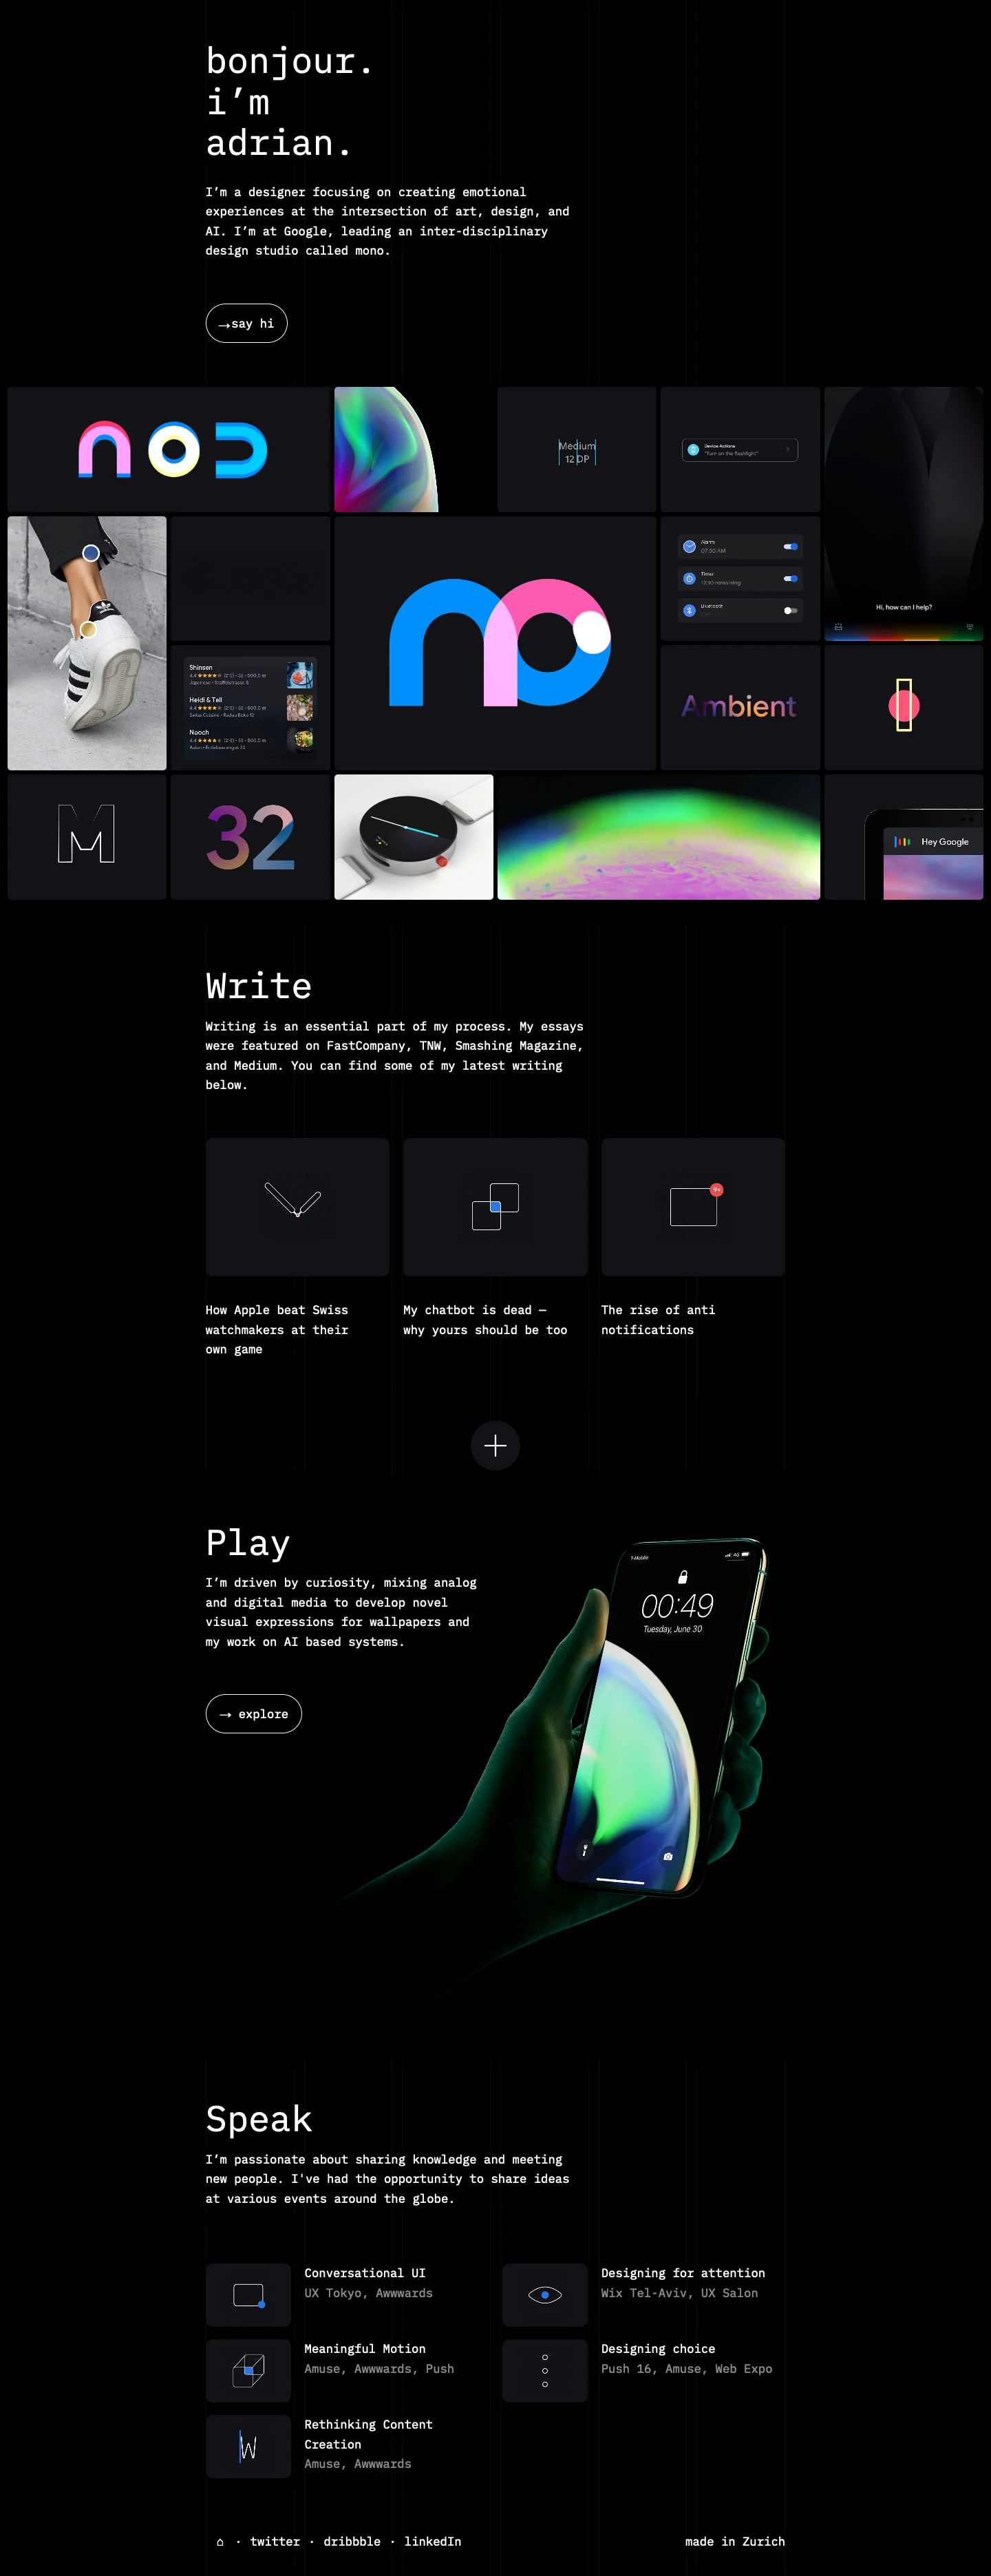 Adrian Z Landing Page Example: I’m a designer focusing on creating emotional experiences at the intersection of art, design, and AI. I’m at Google, leading an inter-disciplinary design studio called mono.